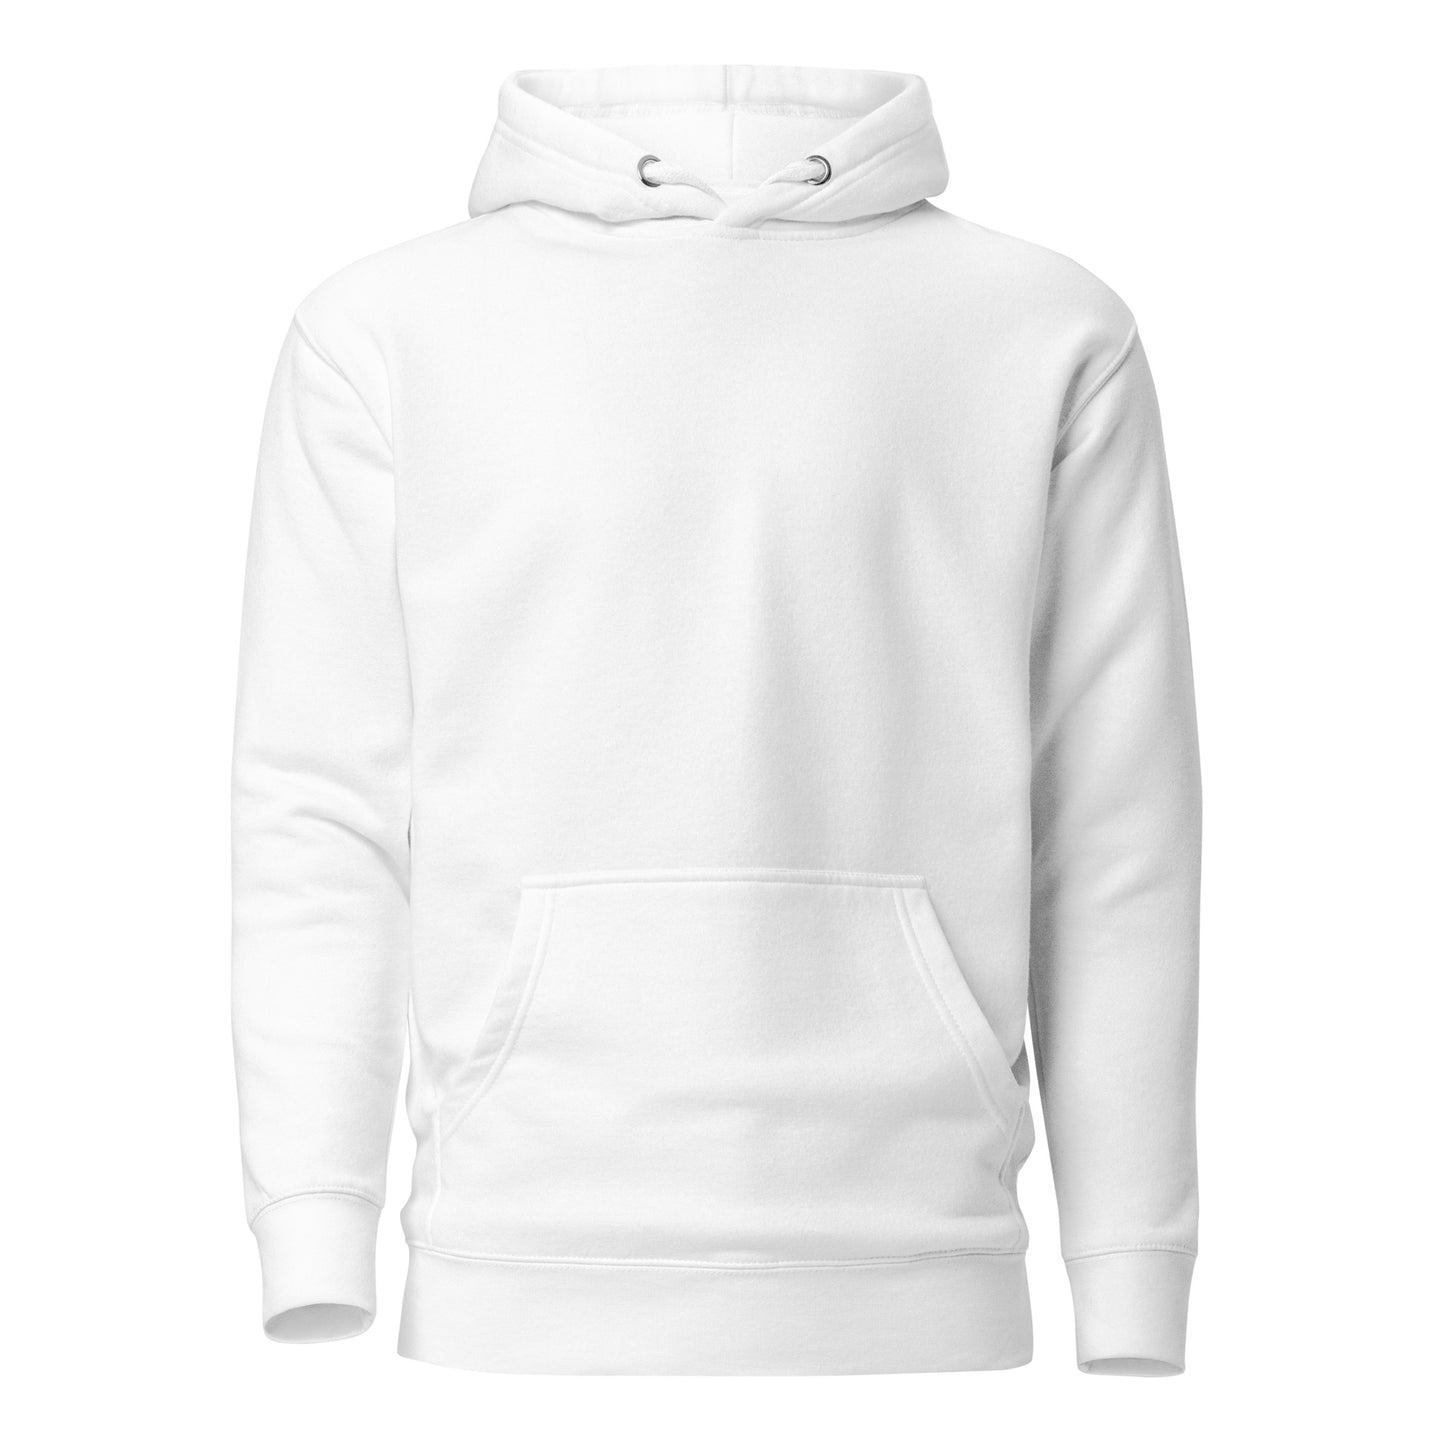 Smiley Face Quality Cotton Heritage Adult Hoodie